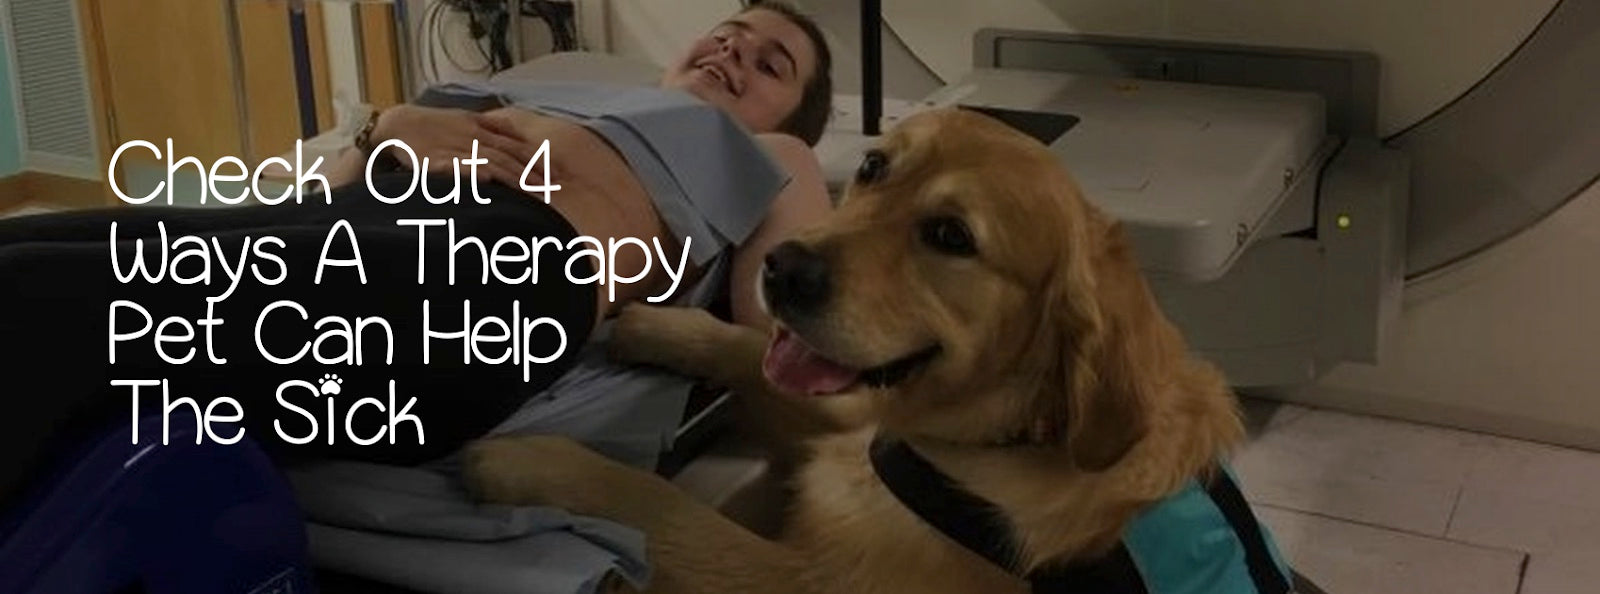 CHECK OUT 4 WAYS A THERAPY PET CAN HELP THE SICK